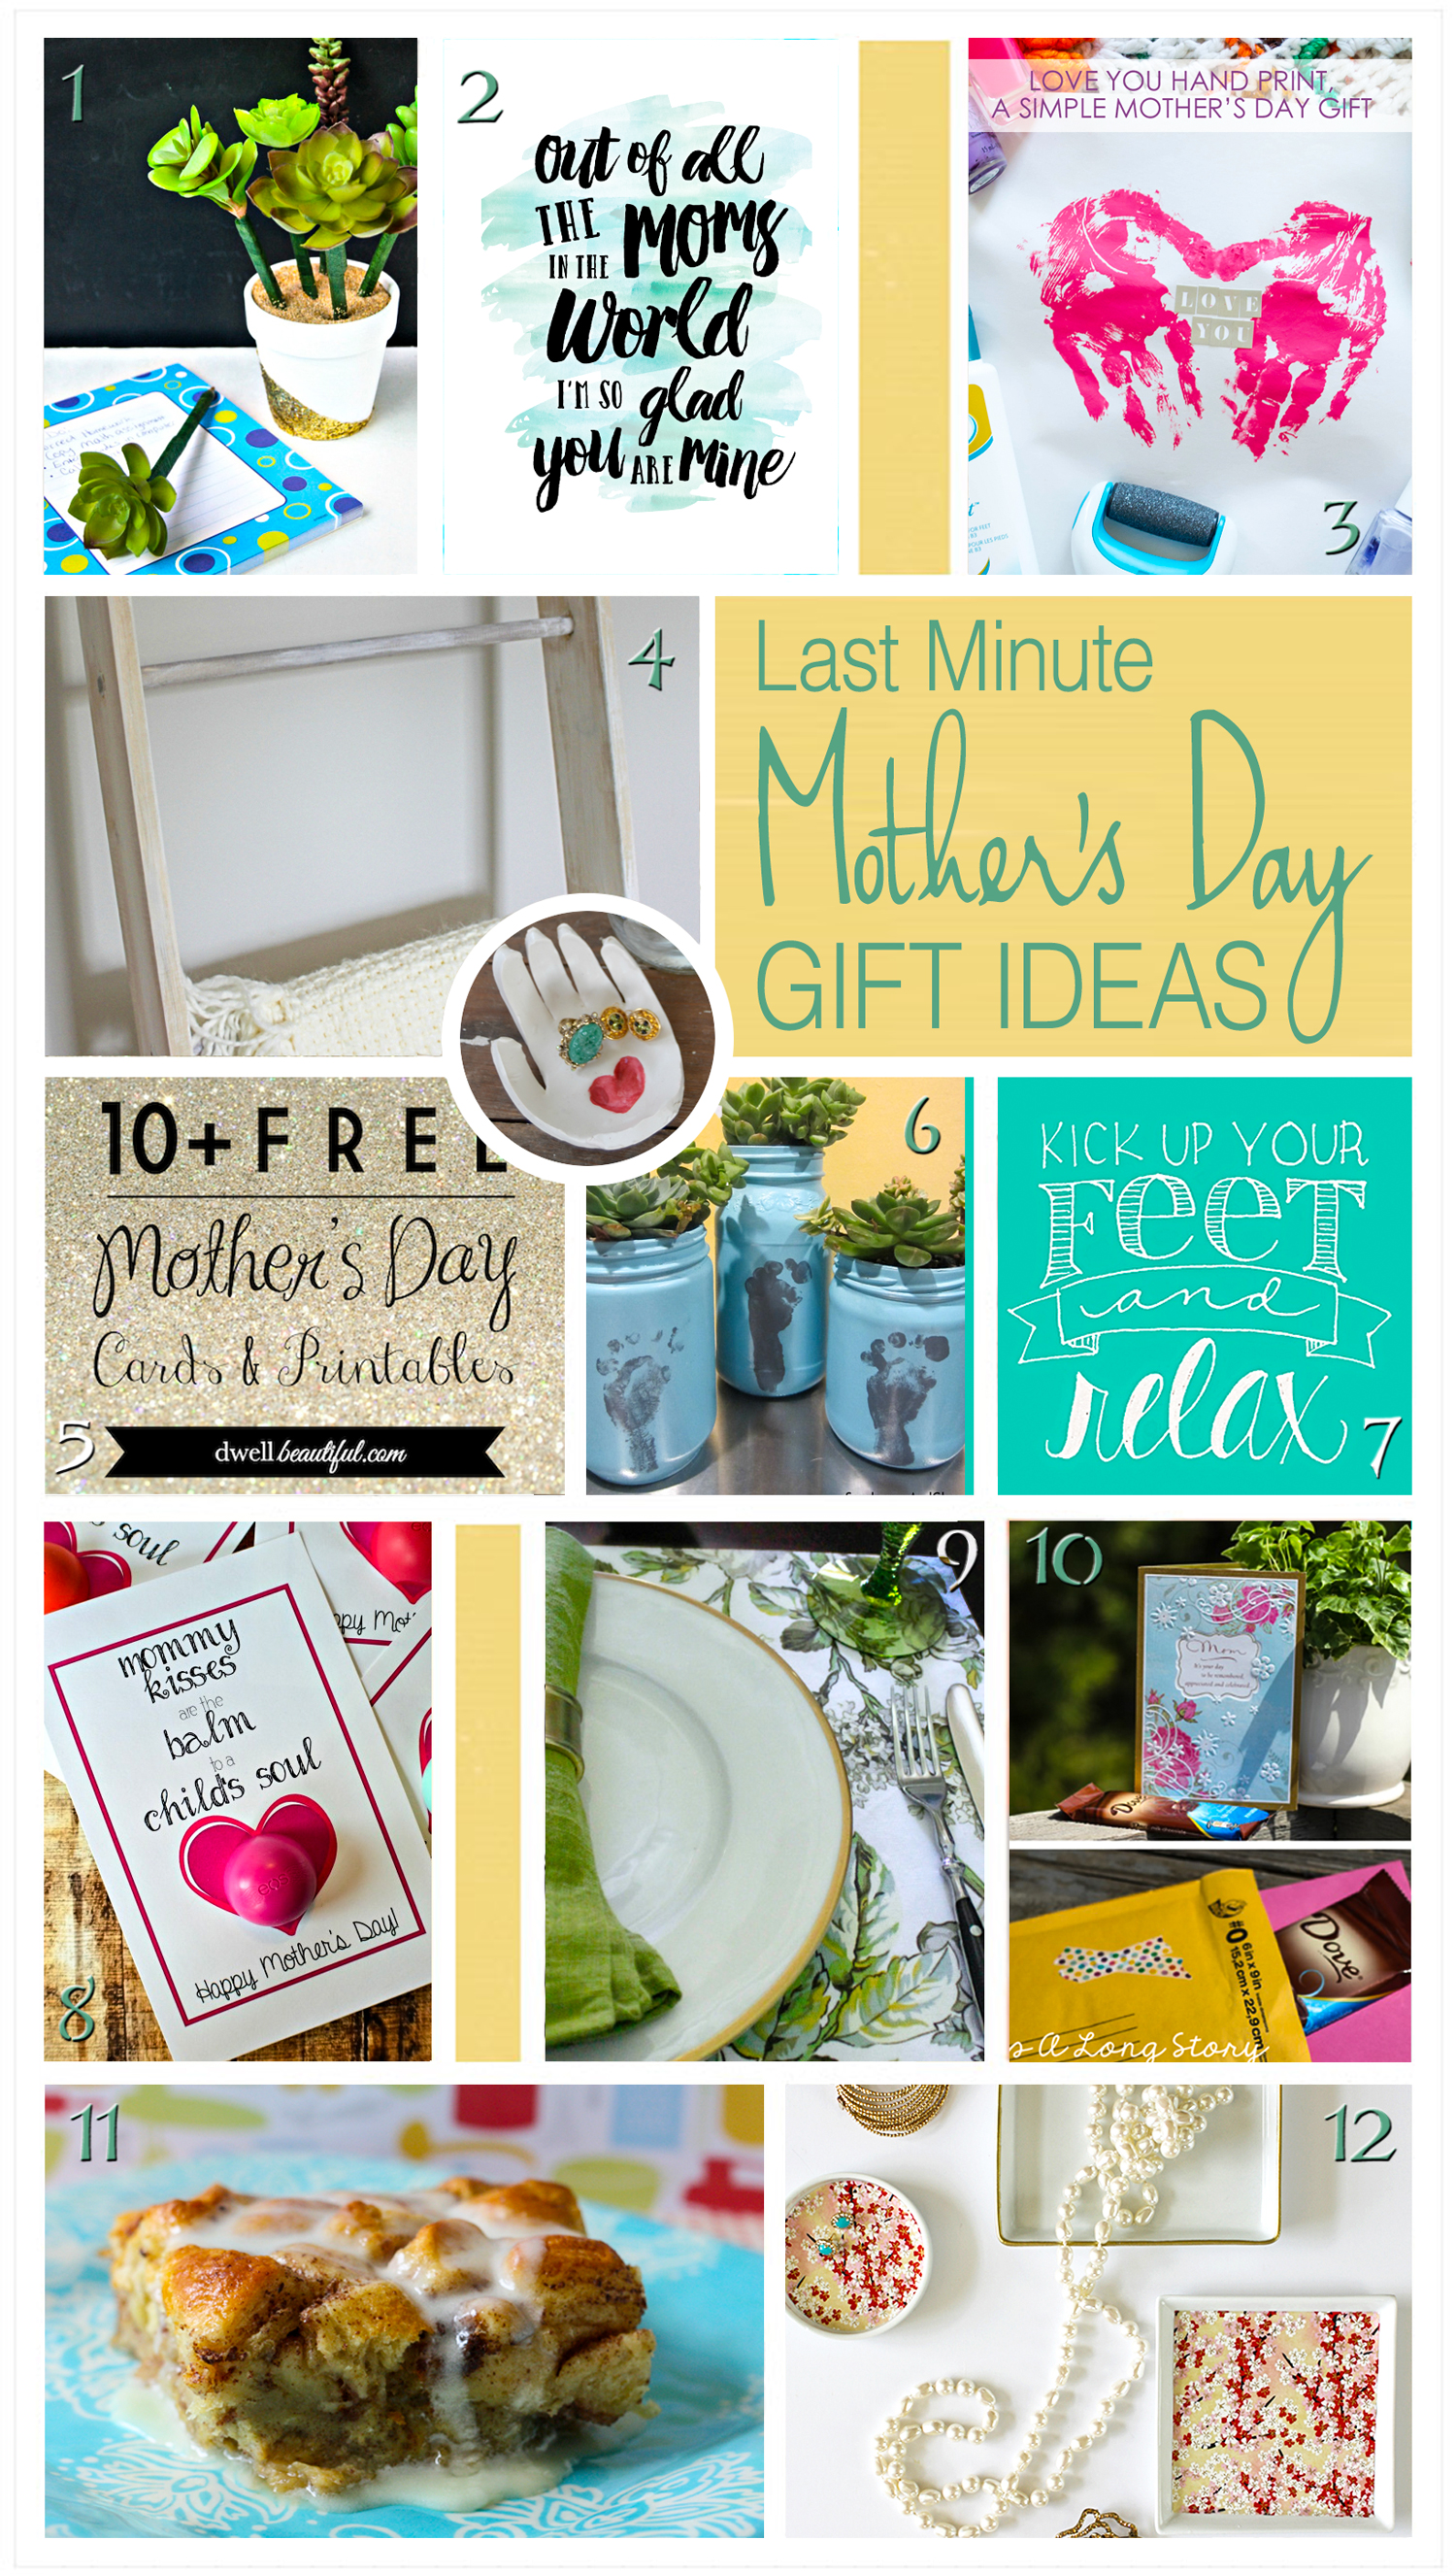 Wayfair-Last-Minute-Mothers-Day-Gifts